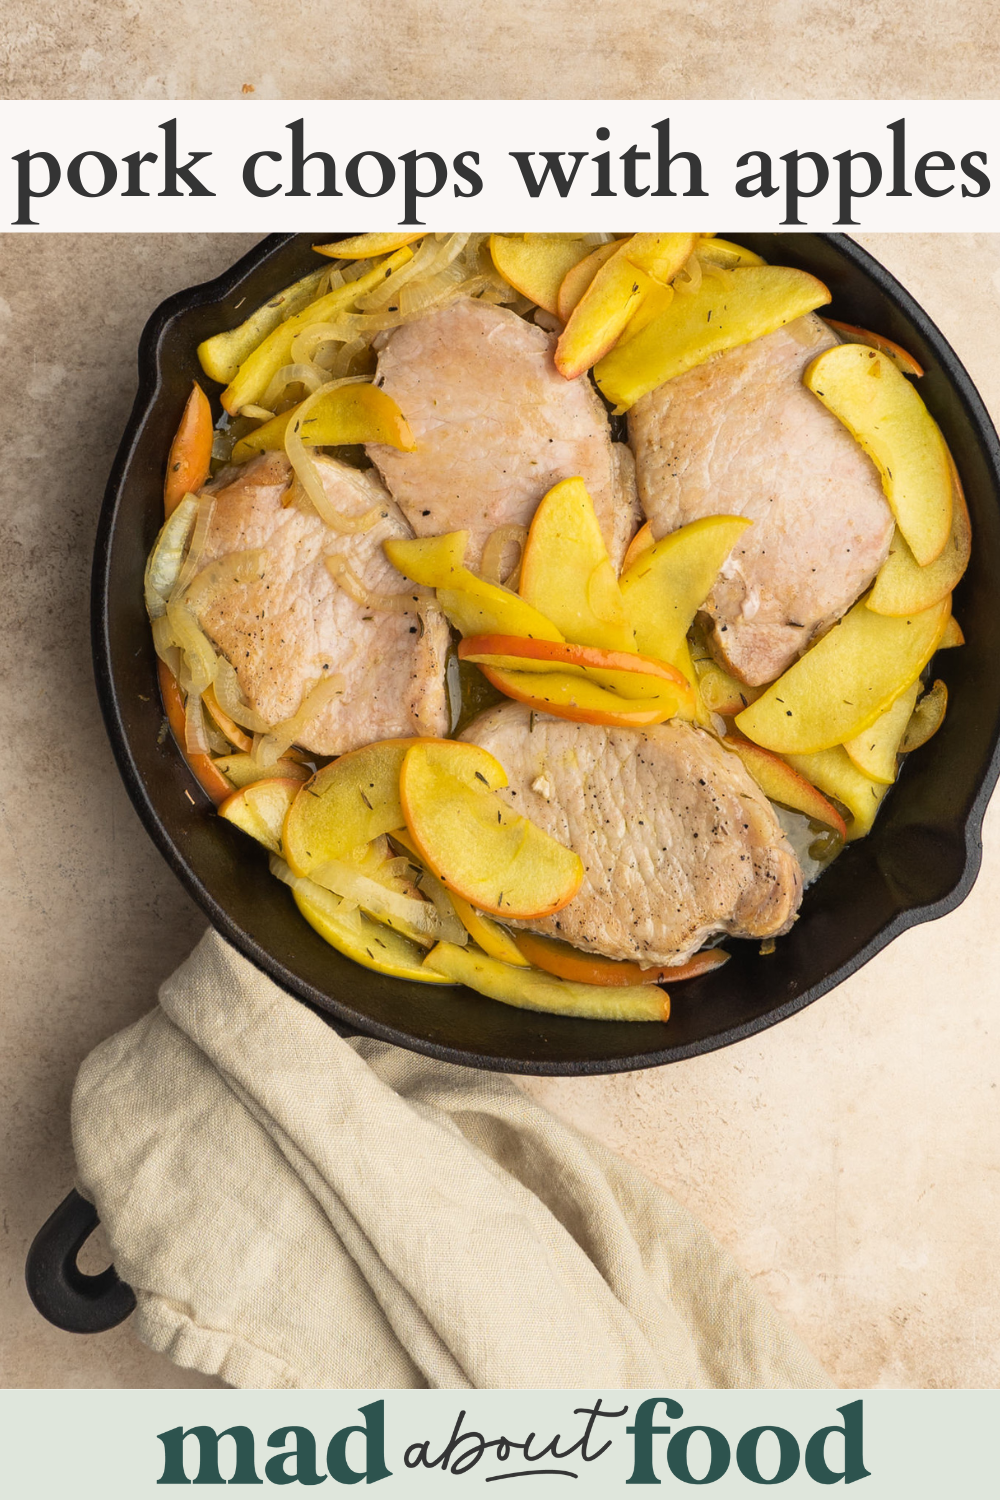 Image for pinning Pork Chops with Apples recipe on Pinterest